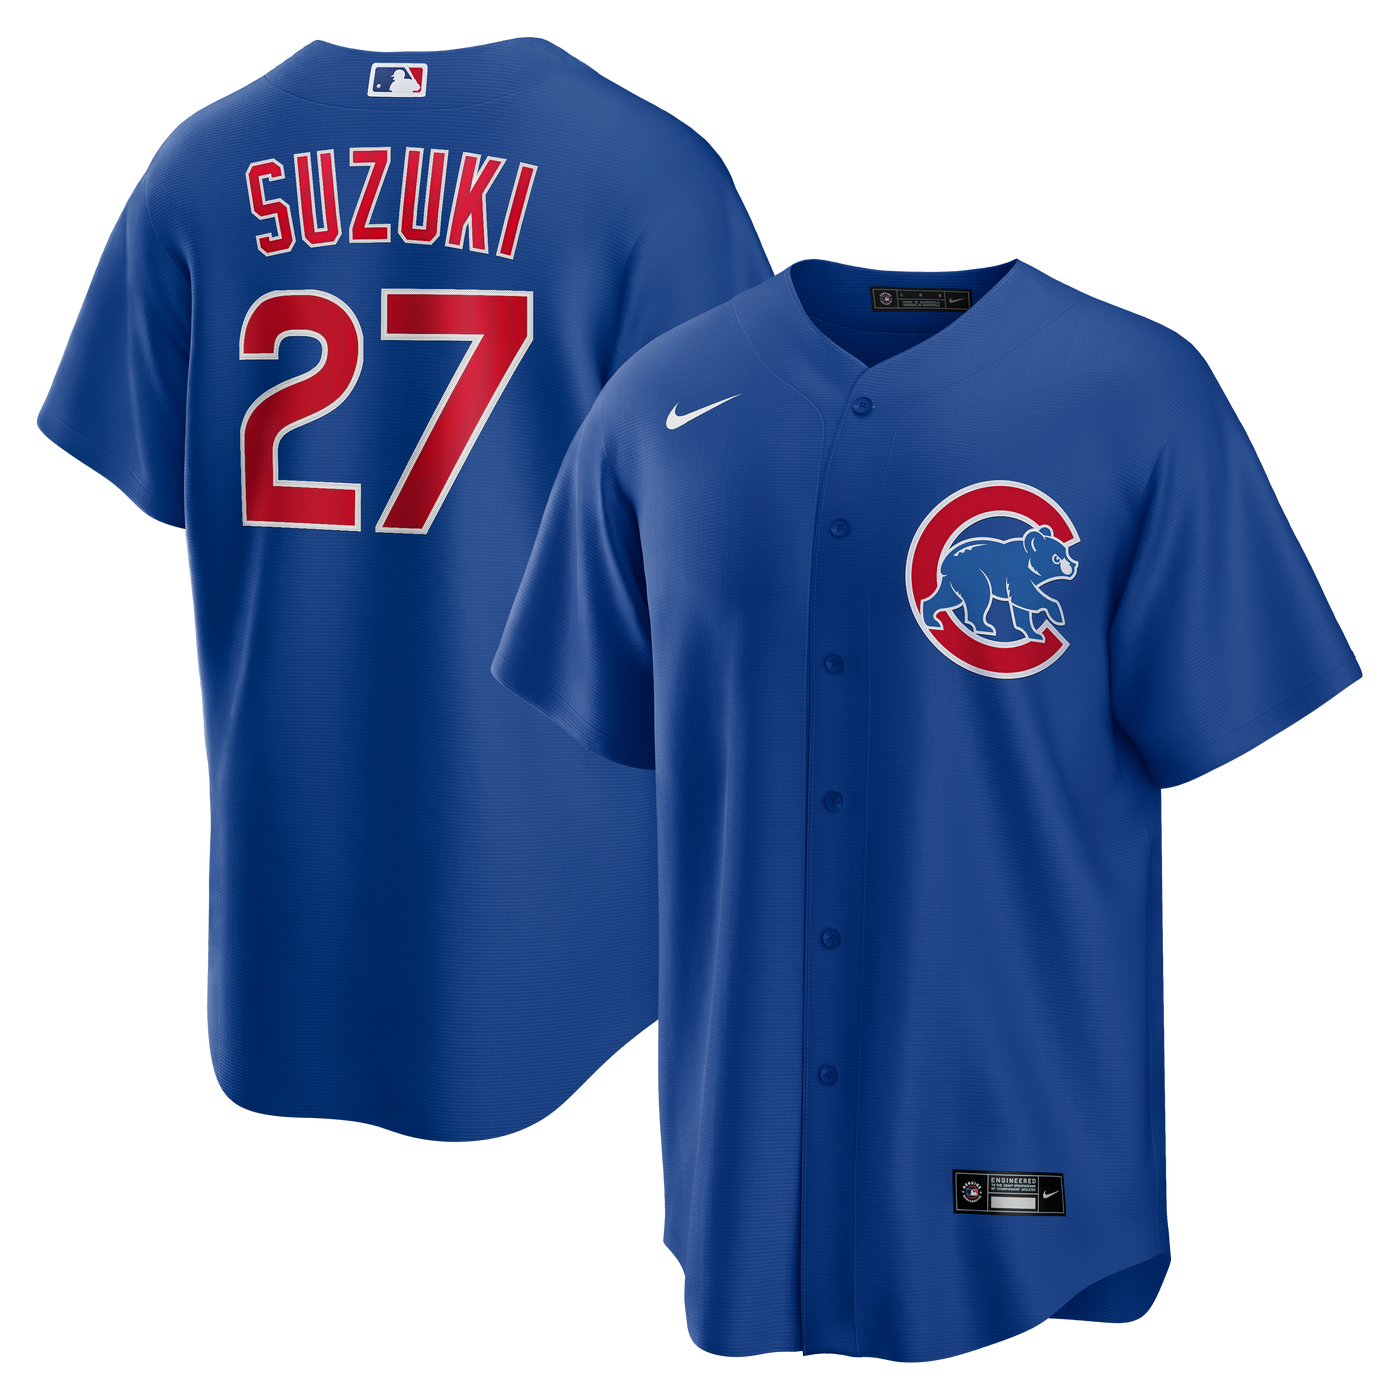 cubs jersey back